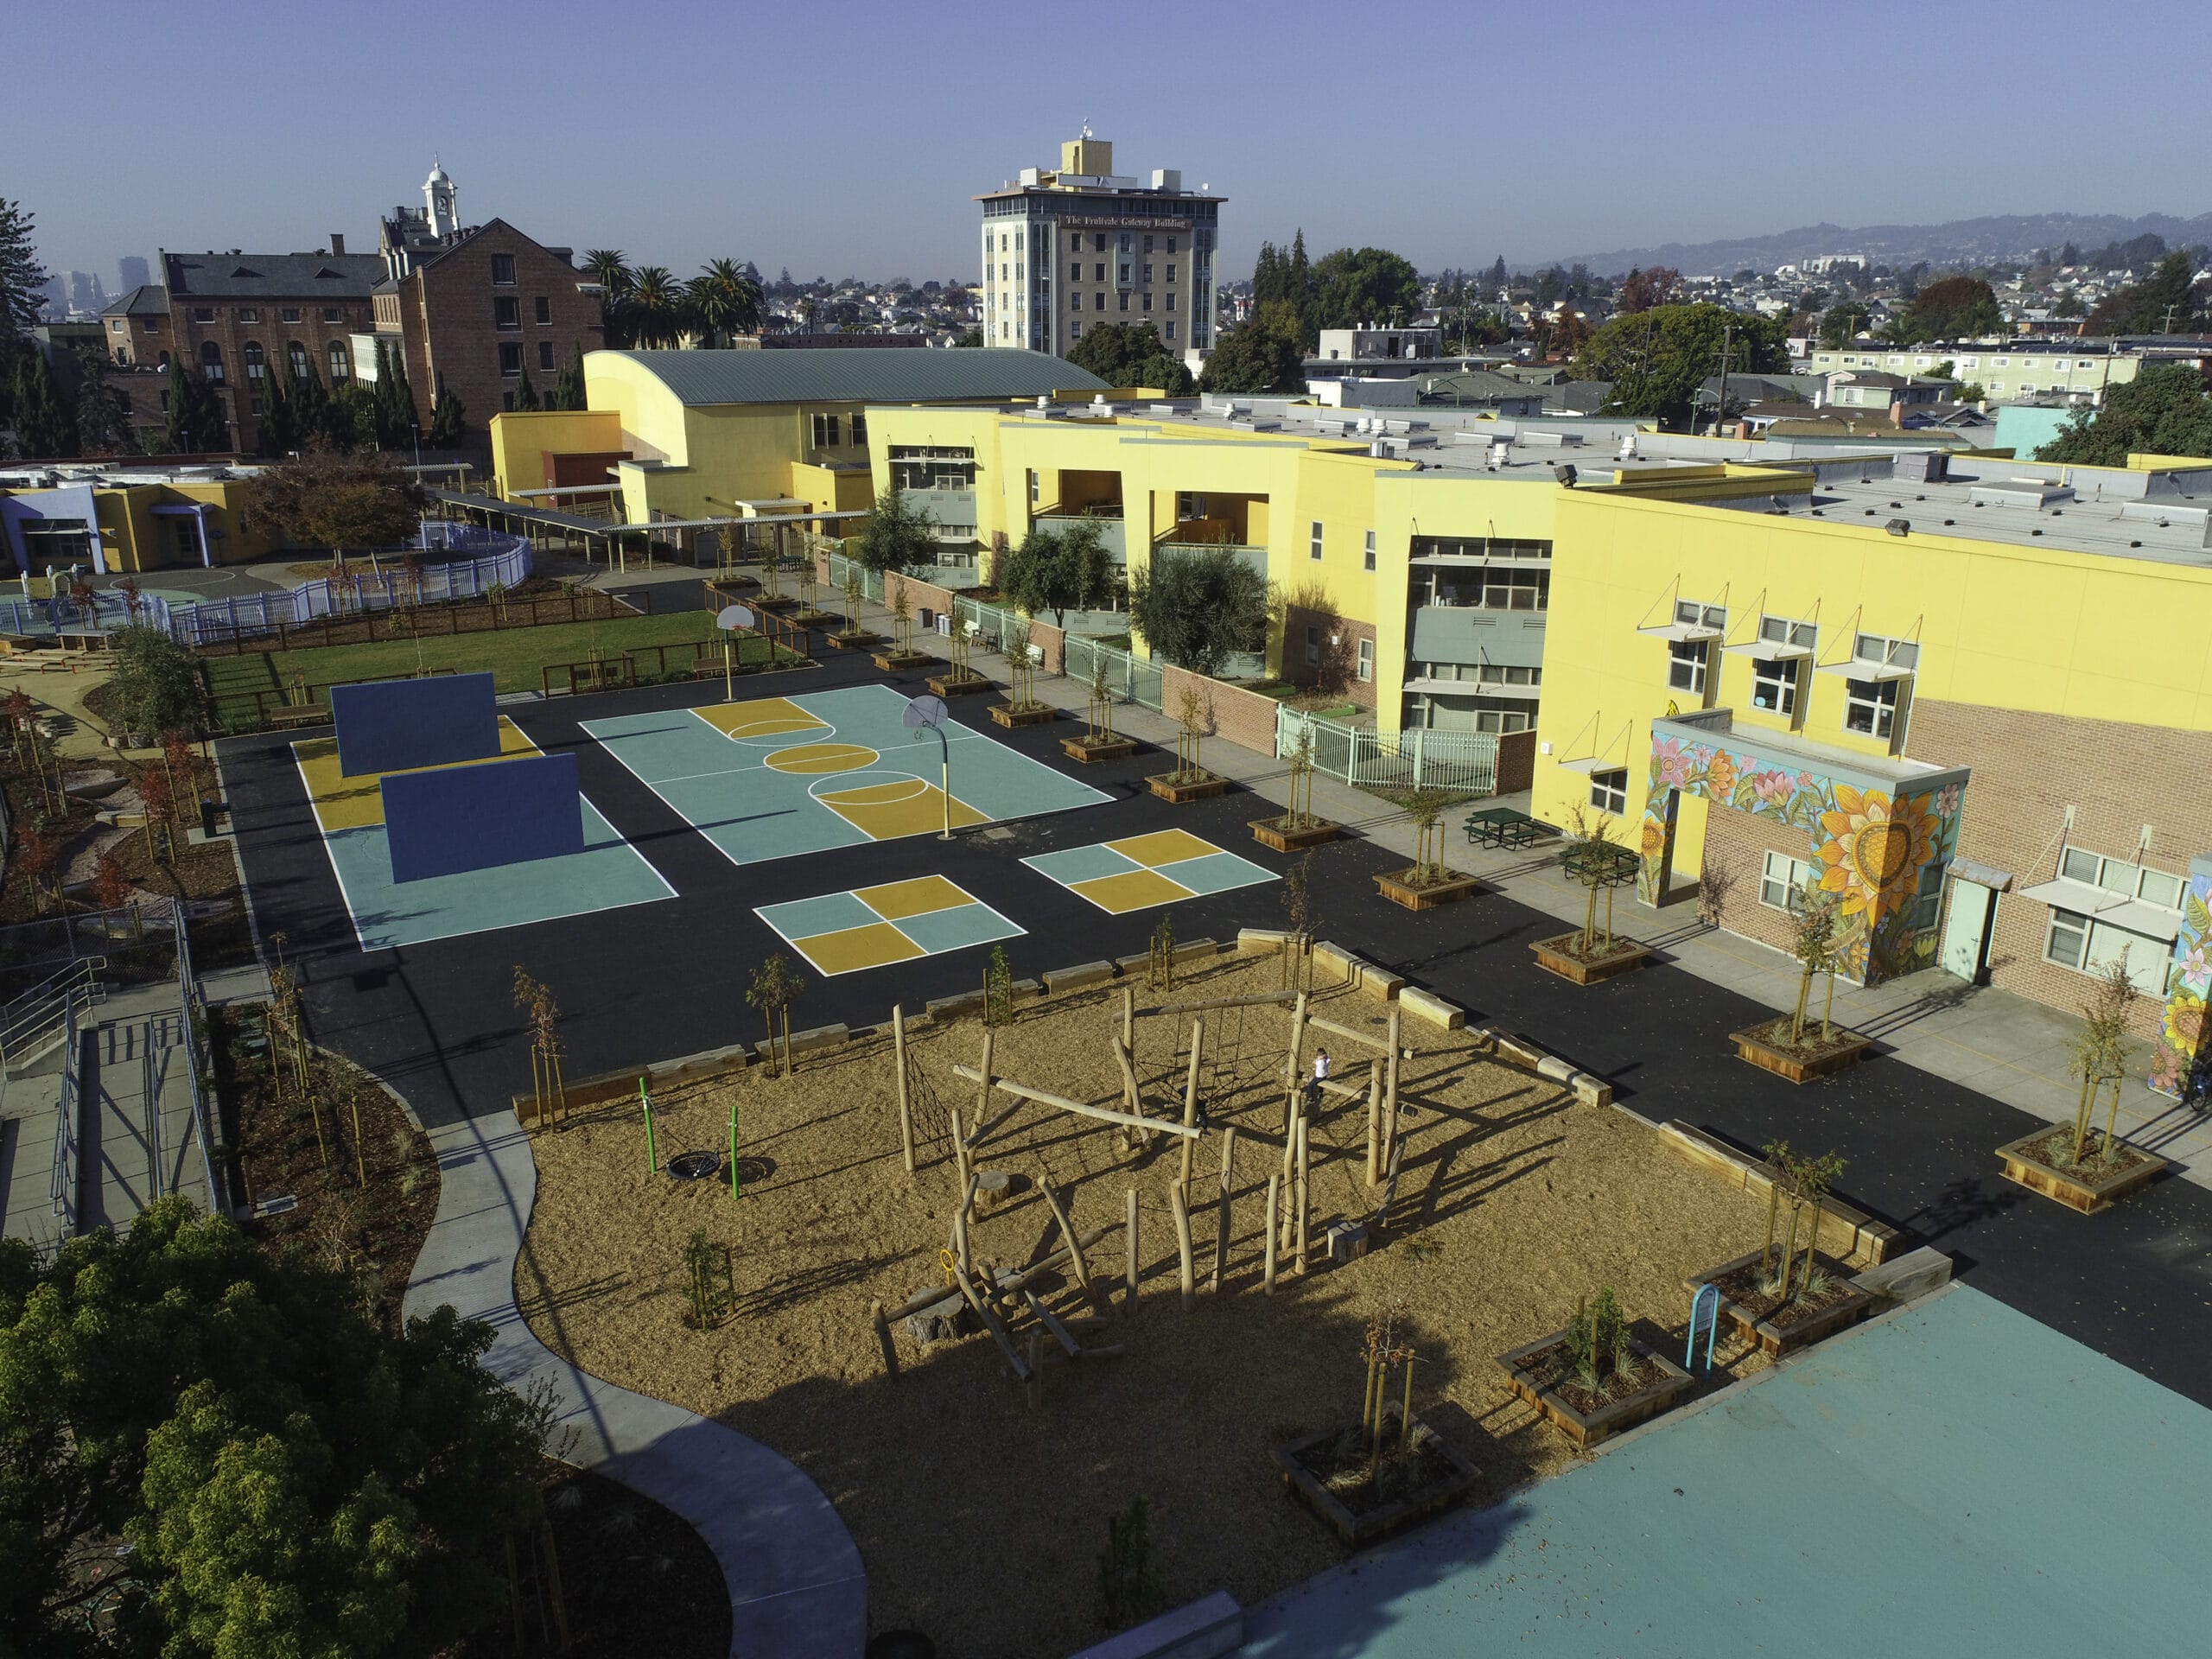 An aerial view of a playground.